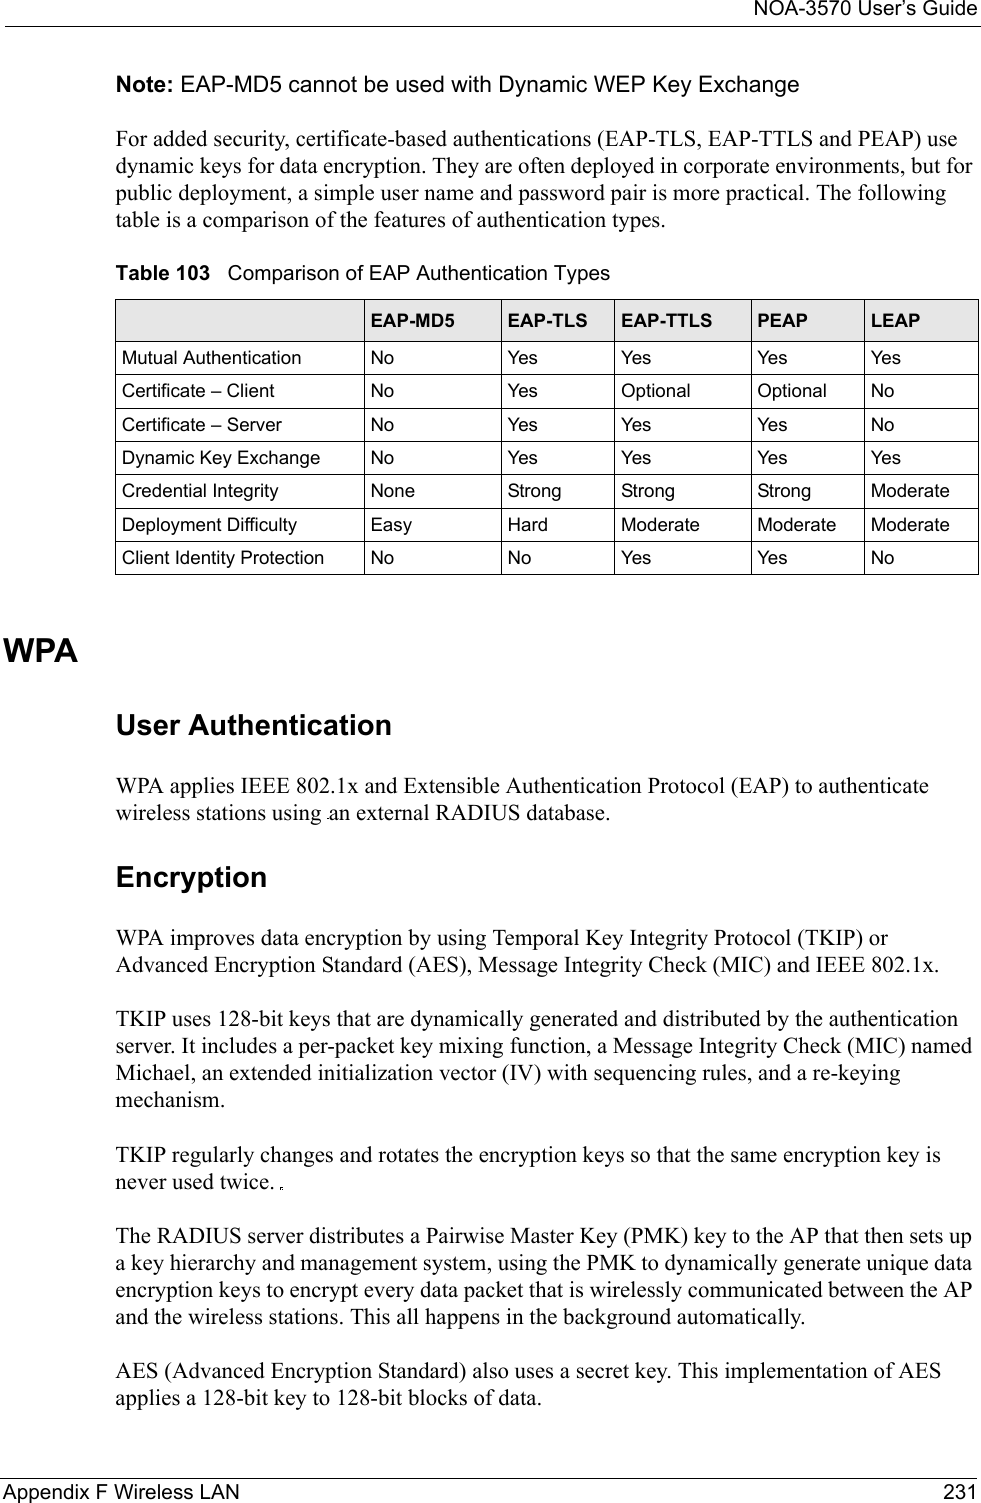 NOA-3570 User’s GuideAppendix F Wireless LAN 231Note: EAP-MD5 cannot be used with Dynamic WEP Key ExchangeFor added security, certificate-based authentications (EAP-TLS, EAP-TTLS and PEAP) use dynamic keys for data encryption. They are often deployed in corporate environments, but for public deployment, a simple user name and password pair is more practical. The following table is a comparison of the features of authentication types.WPAUser Authentication WPA applies IEEE 802.1x and Extensible Authentication Protocol (EAP) to authenticate wireless stations using an external RADIUS database. Encryption WPA improves data encryption by using Temporal Key Integrity Protocol (TKIP) or Advanced Encryption Standard (AES), Message Integrity Check (MIC) and IEEE 802.1x. TKIP uses 128-bit keys that are dynamically generated and distributed by the authentication server. It includes a per-packet key mixing function, a Message Integrity Check (MIC) named Michael, an extended initialization vector (IV) with sequencing rules, and a re-keying mechanism.TKIP regularly changes and rotates the encryption keys so that the same encryption key is never used twice. The RADIUS server distributes a Pairwise Master Key (PMK) key to the AP that then sets up a key hierarchy and management system, using the PMK to dynamically generate unique data encryption keys to encrypt every data packet that is wirelessly communicated between the AP and the wireless stations. This all happens in the background automatically.AES (Advanced Encryption Standard) also uses a secret key. This implementation of AES applies a 128-bit key to 128-bit blocks of data.Table 103   Comparison of EAP Authentication TypesEAP-MD5 EAP-TLS EAP-TTLS PEAP LEAPMutual Authentication No Yes Yes Yes YesCertificate – Client No Yes Optional Optional NoCertificate – Server No Yes Yes Yes NoDynamic Key Exchange No Yes Yes Yes YesCredential Integrity None Strong Strong Strong ModerateDeployment Difficulty Easy Hard Moderate Moderate ModerateClient Identity Protection No No Yes Yes No